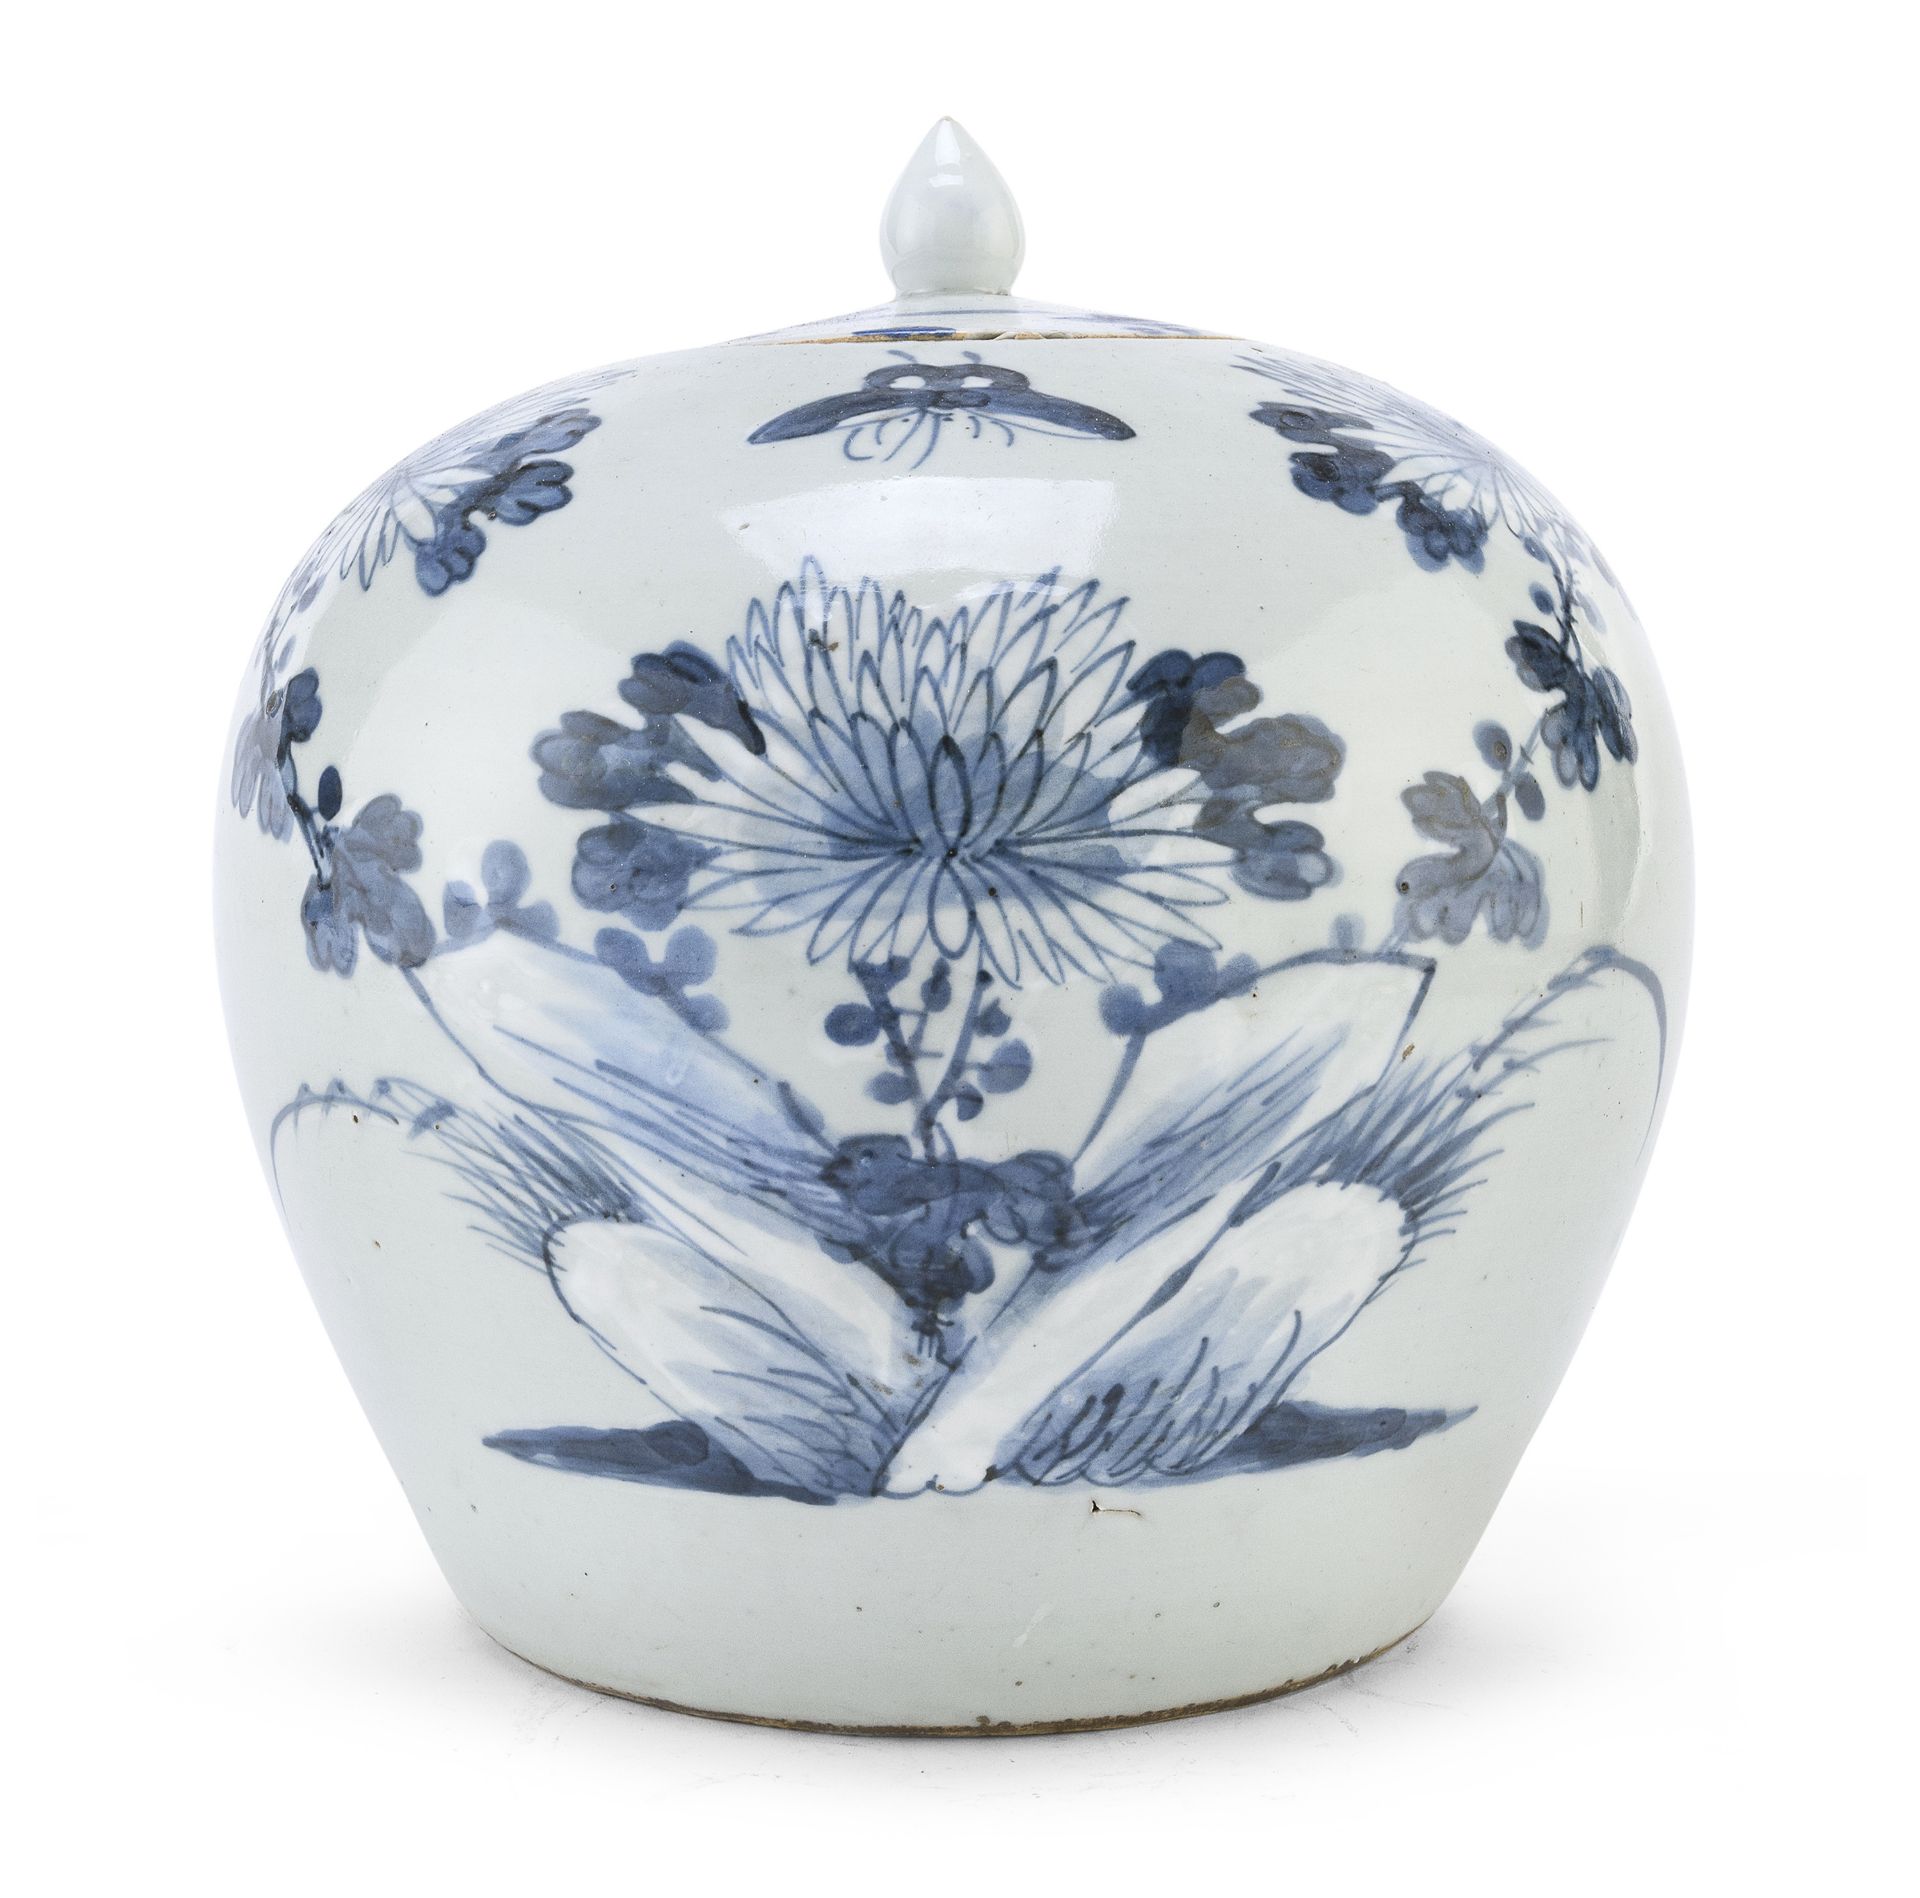 A CHINESE LIDDED WHITE AND BLUE PORCELAIN JAR FIRST HALF 20TH CENTURY. IMPROPER LID.